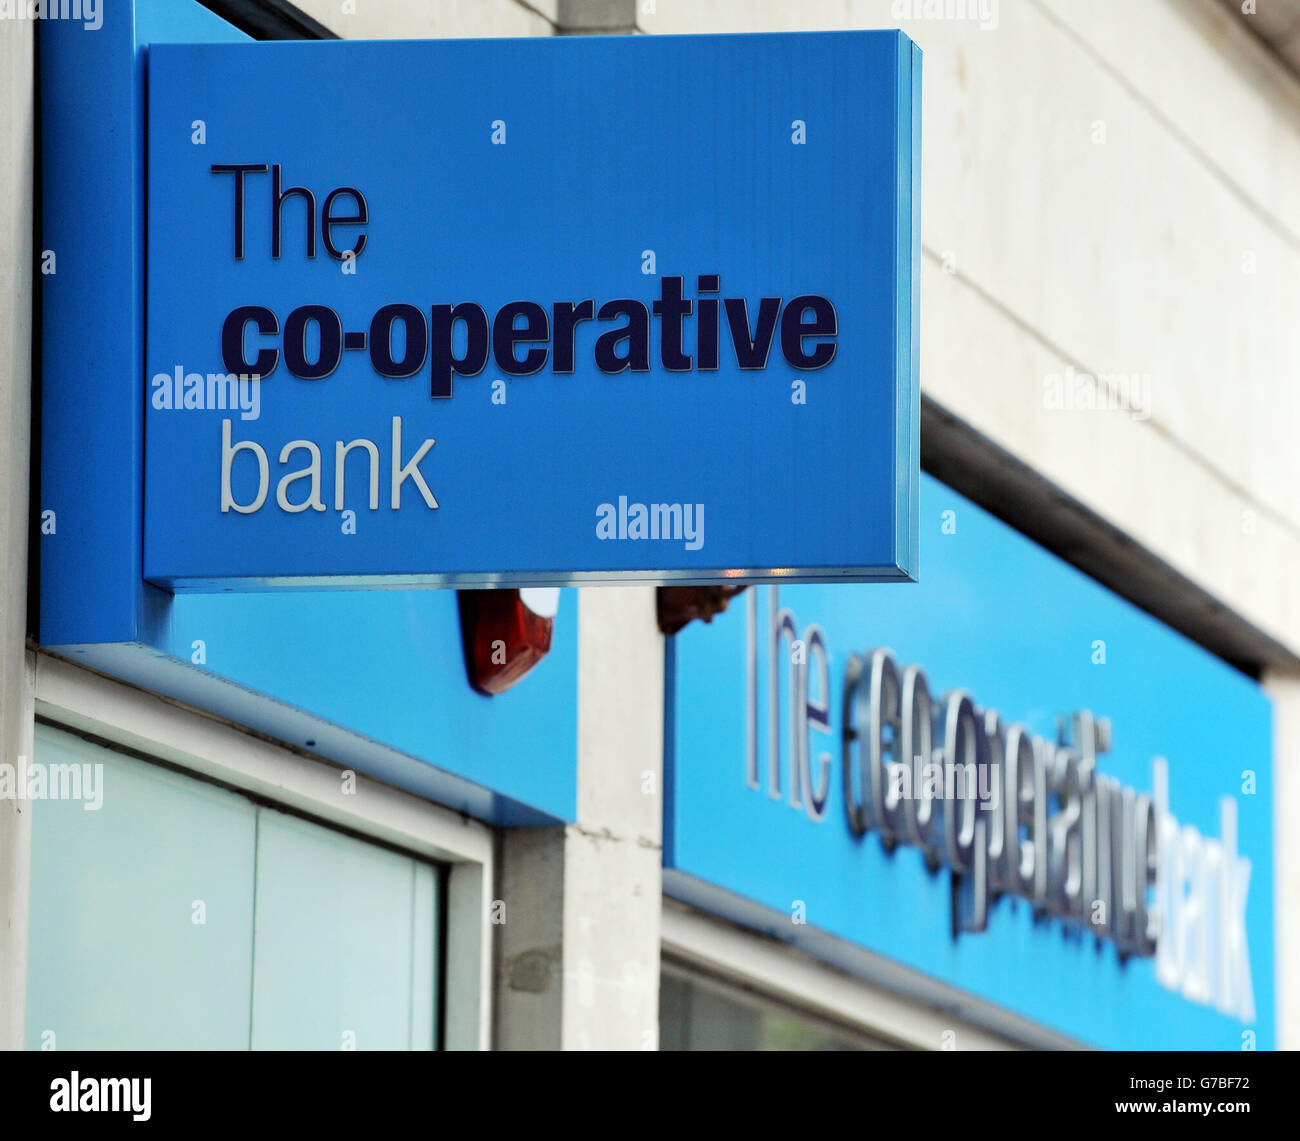 Stock photo of a co-operative bank sign in Holborn, central London. Stock Photo